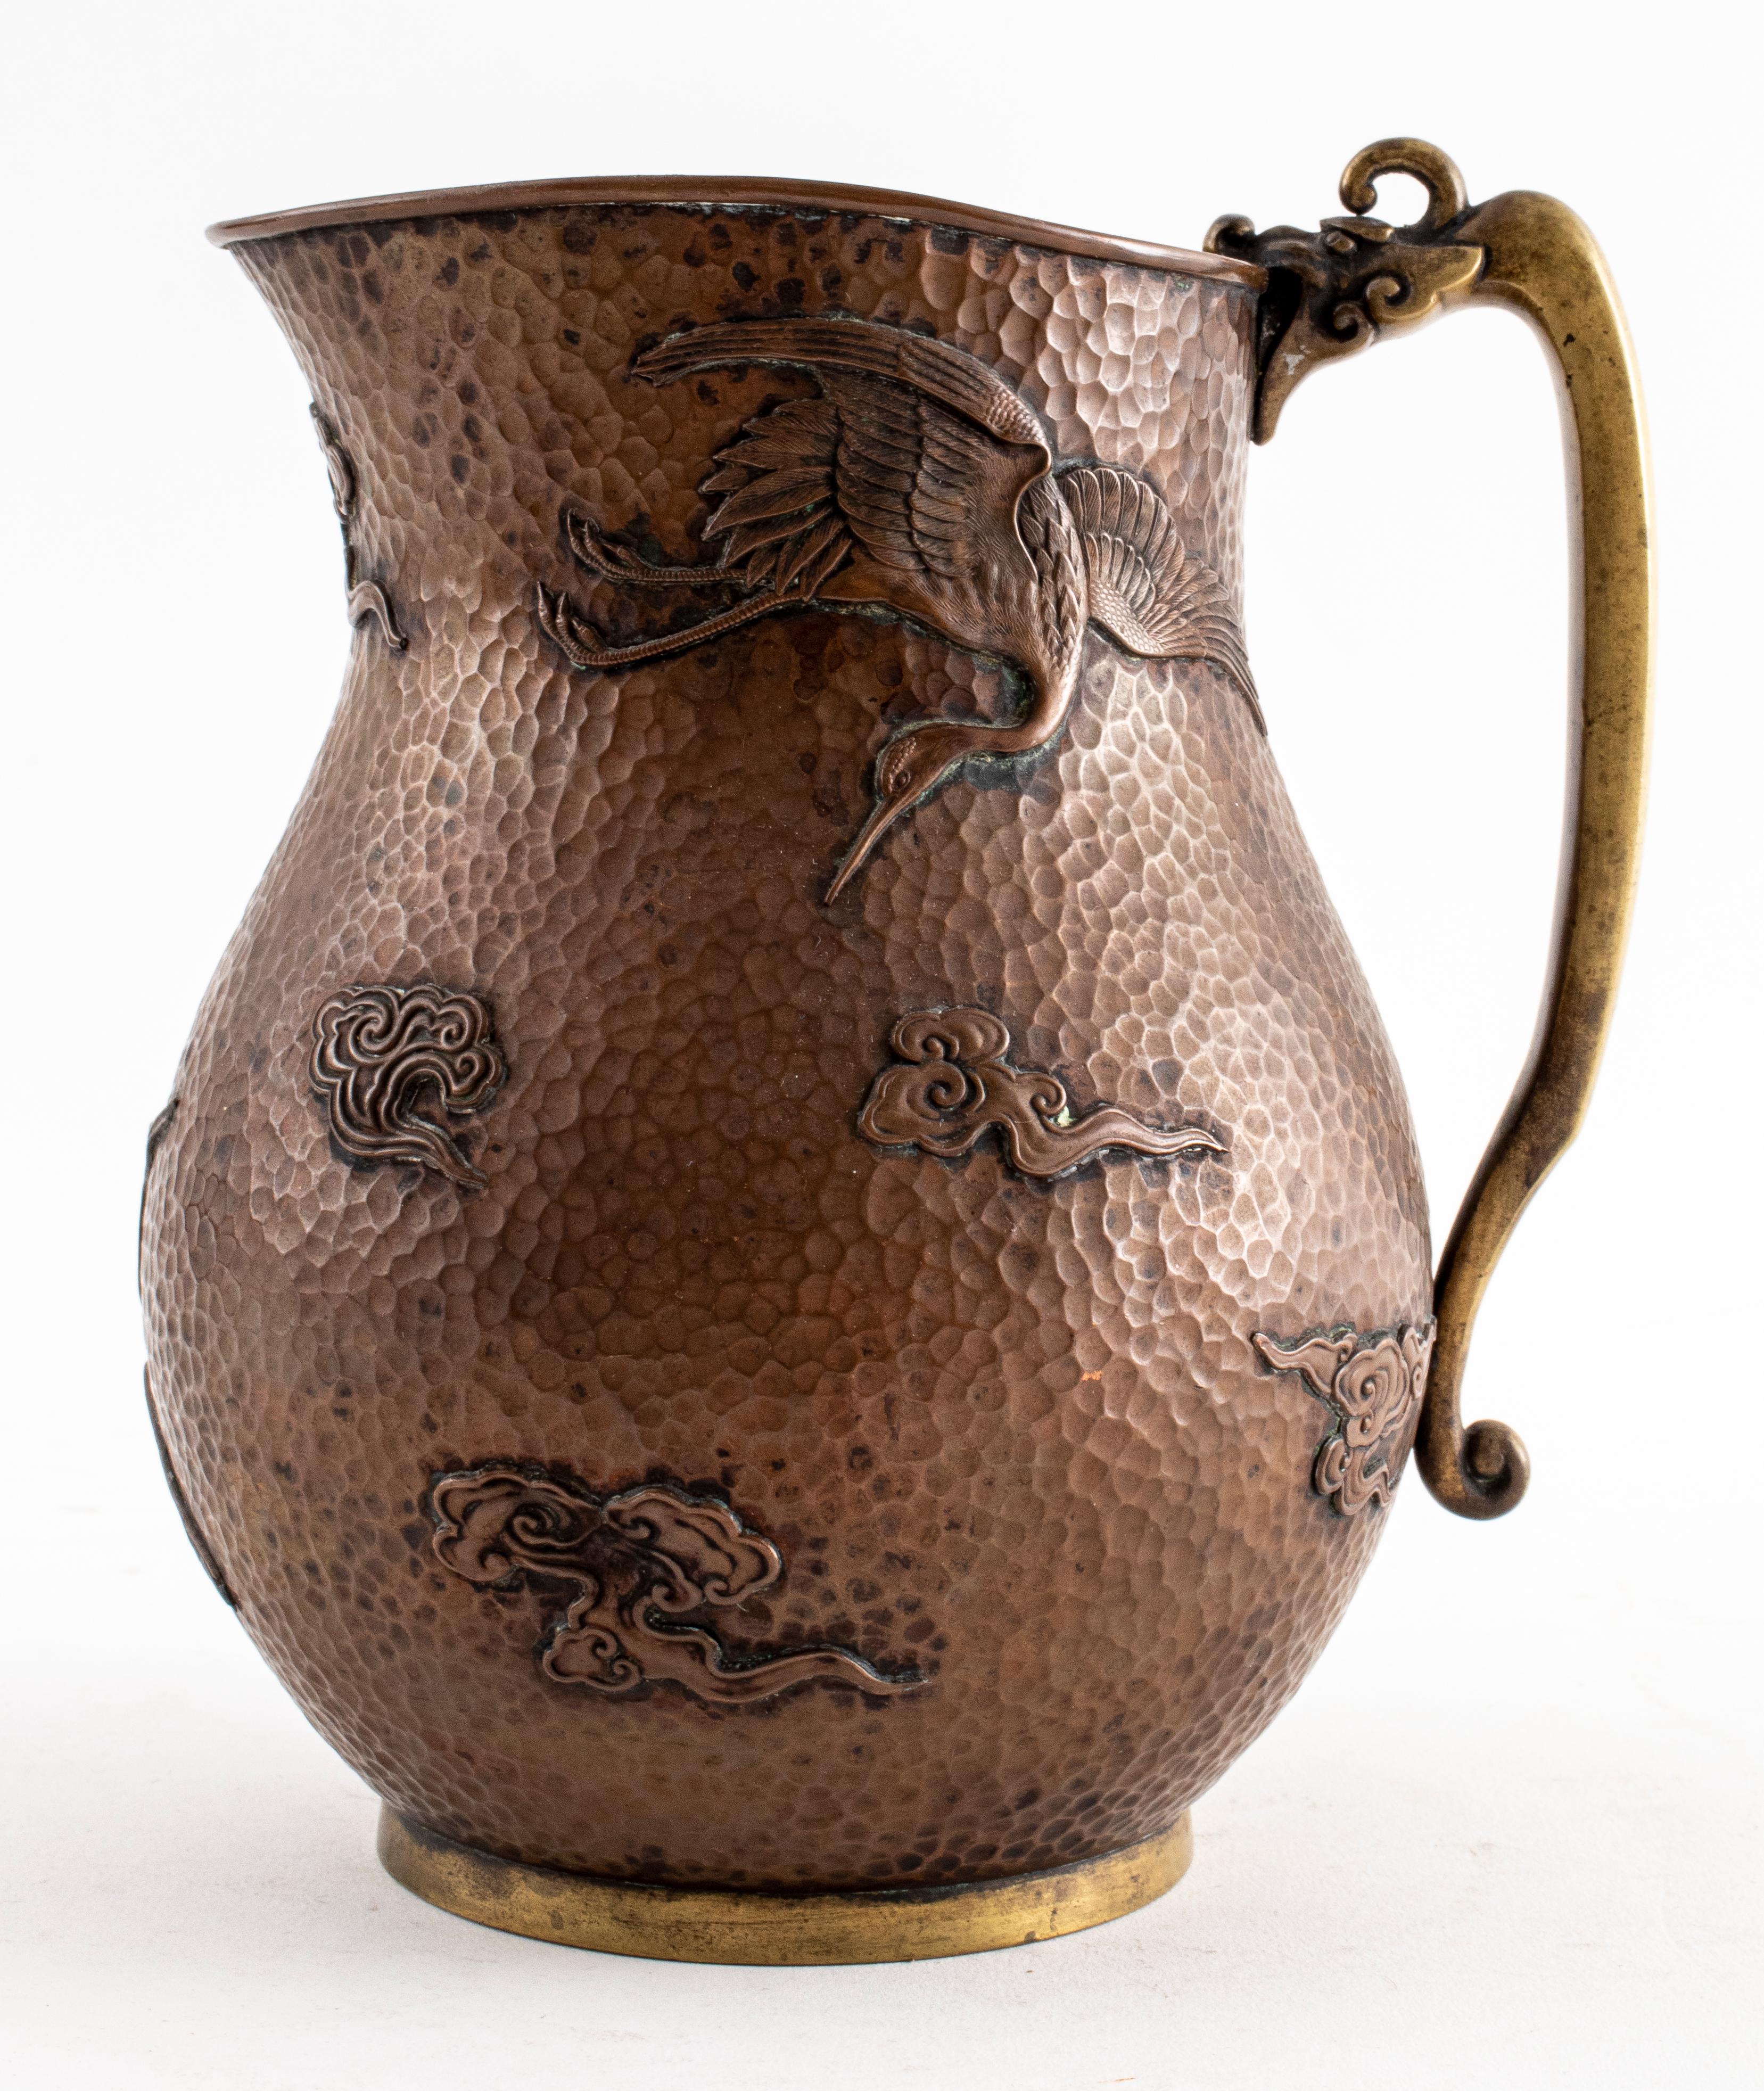 Korean hammered mixed metal pitcher with crane and cloud motifs raised in relief with a dragon-head handle. Measures: 6.75